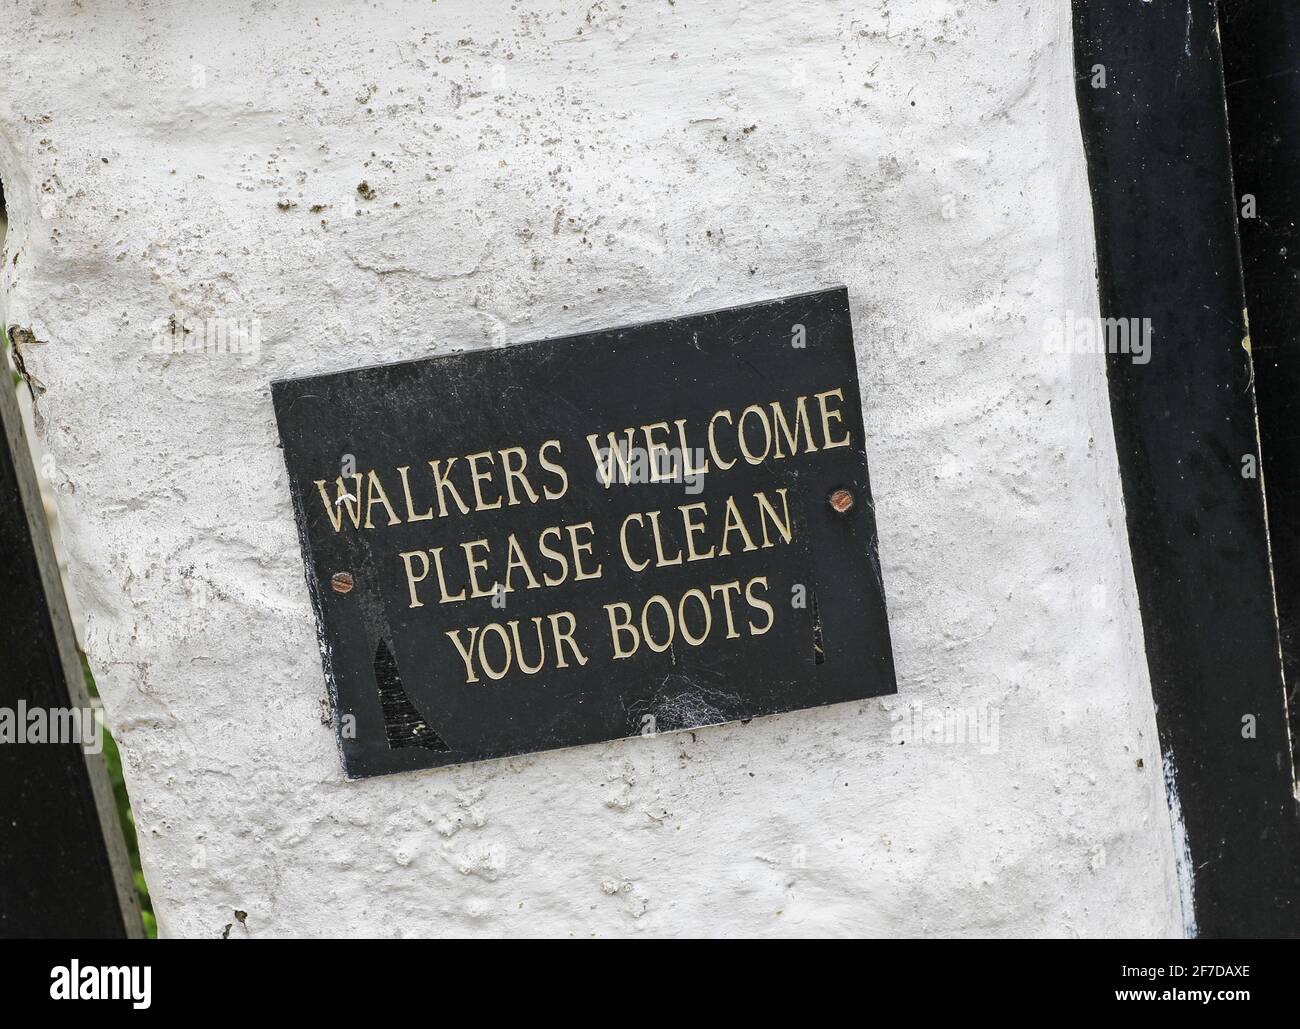 A sign saying 'Walkers welcome please clean your boots' on a pub or public house, Cheshire, England, UK Stock Photo